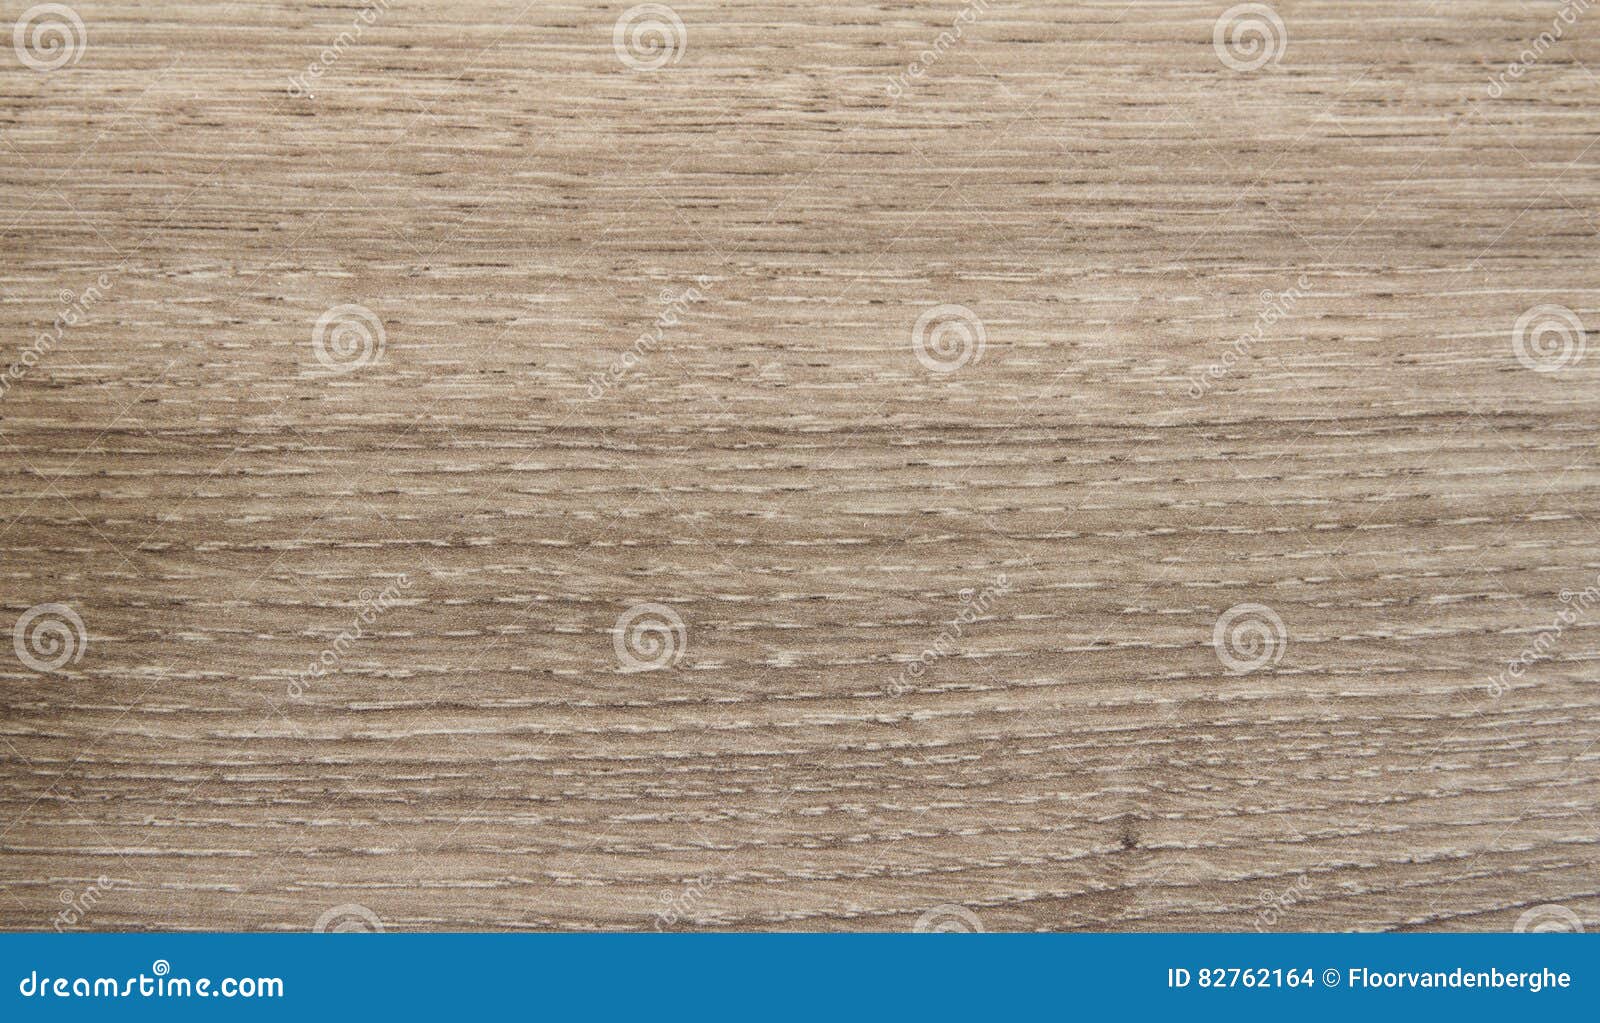 Beige Soft Fake Wood Print Texture Stock Photo - Image of nature, textured:  82762164